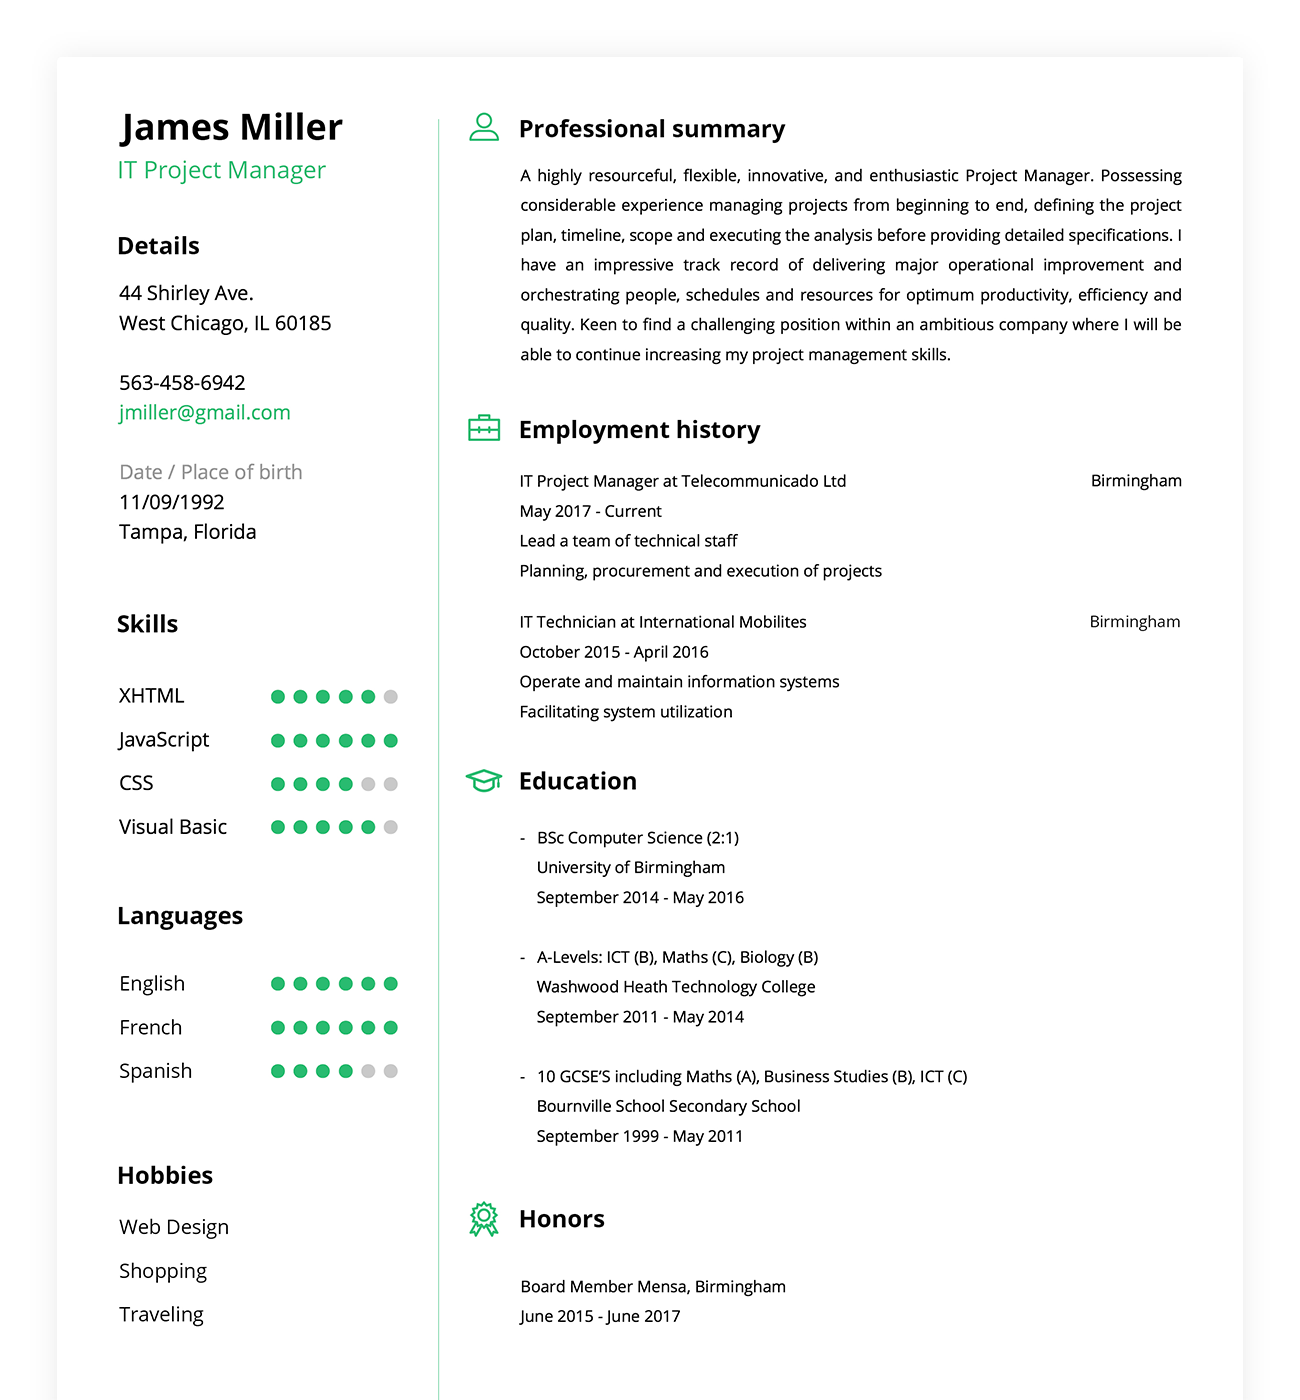 Online professional resume writing services for military